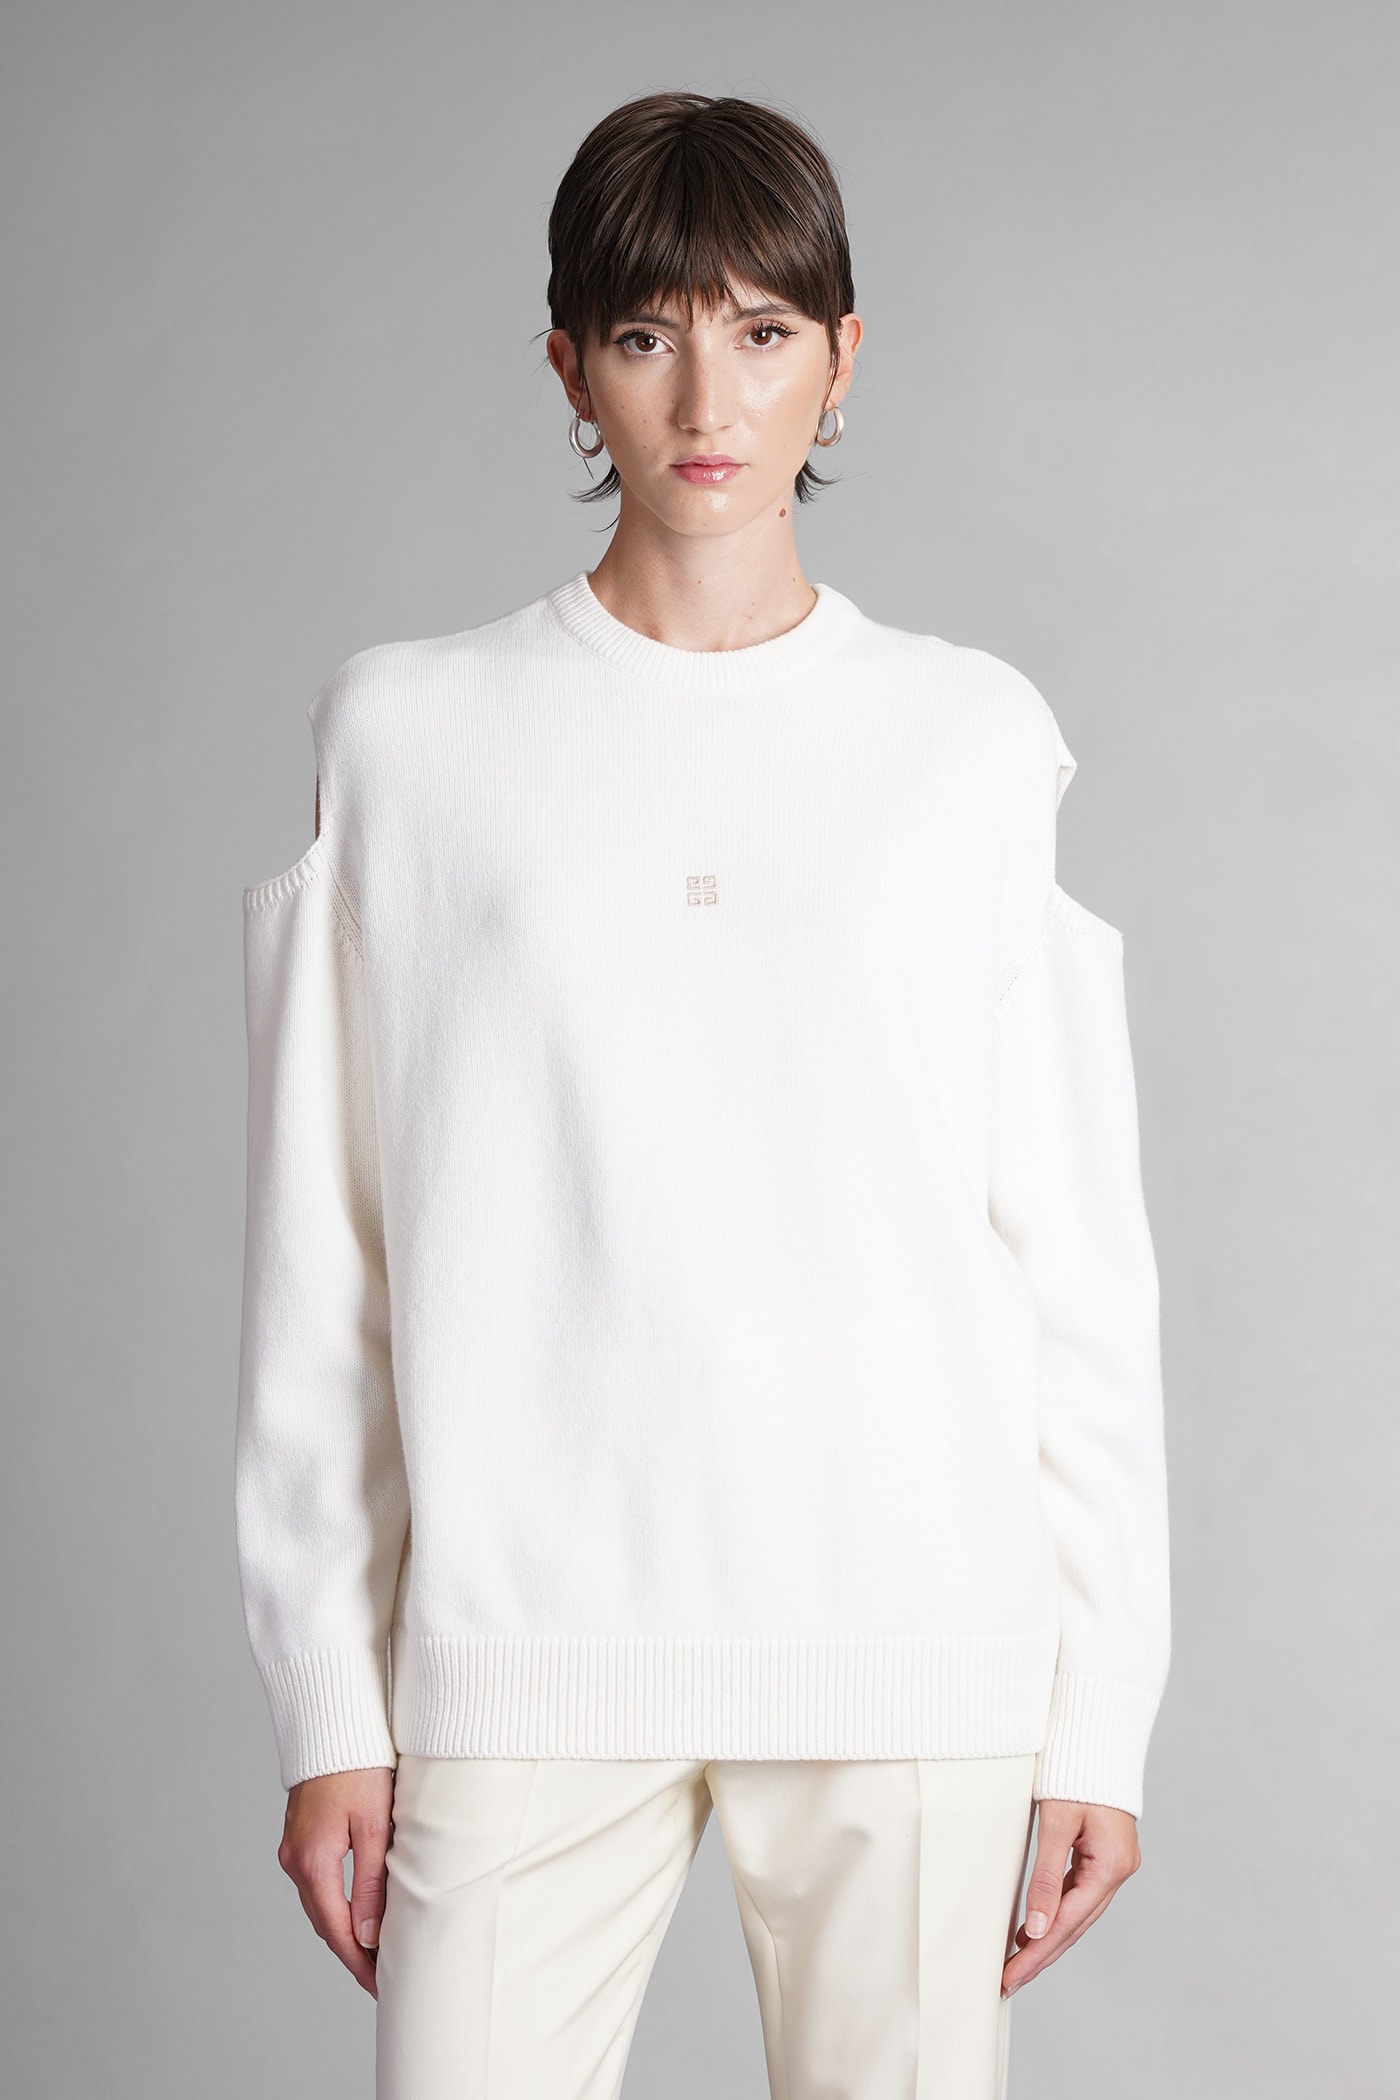 GIVENCHY KNITWEAR IN WHITE WOOL